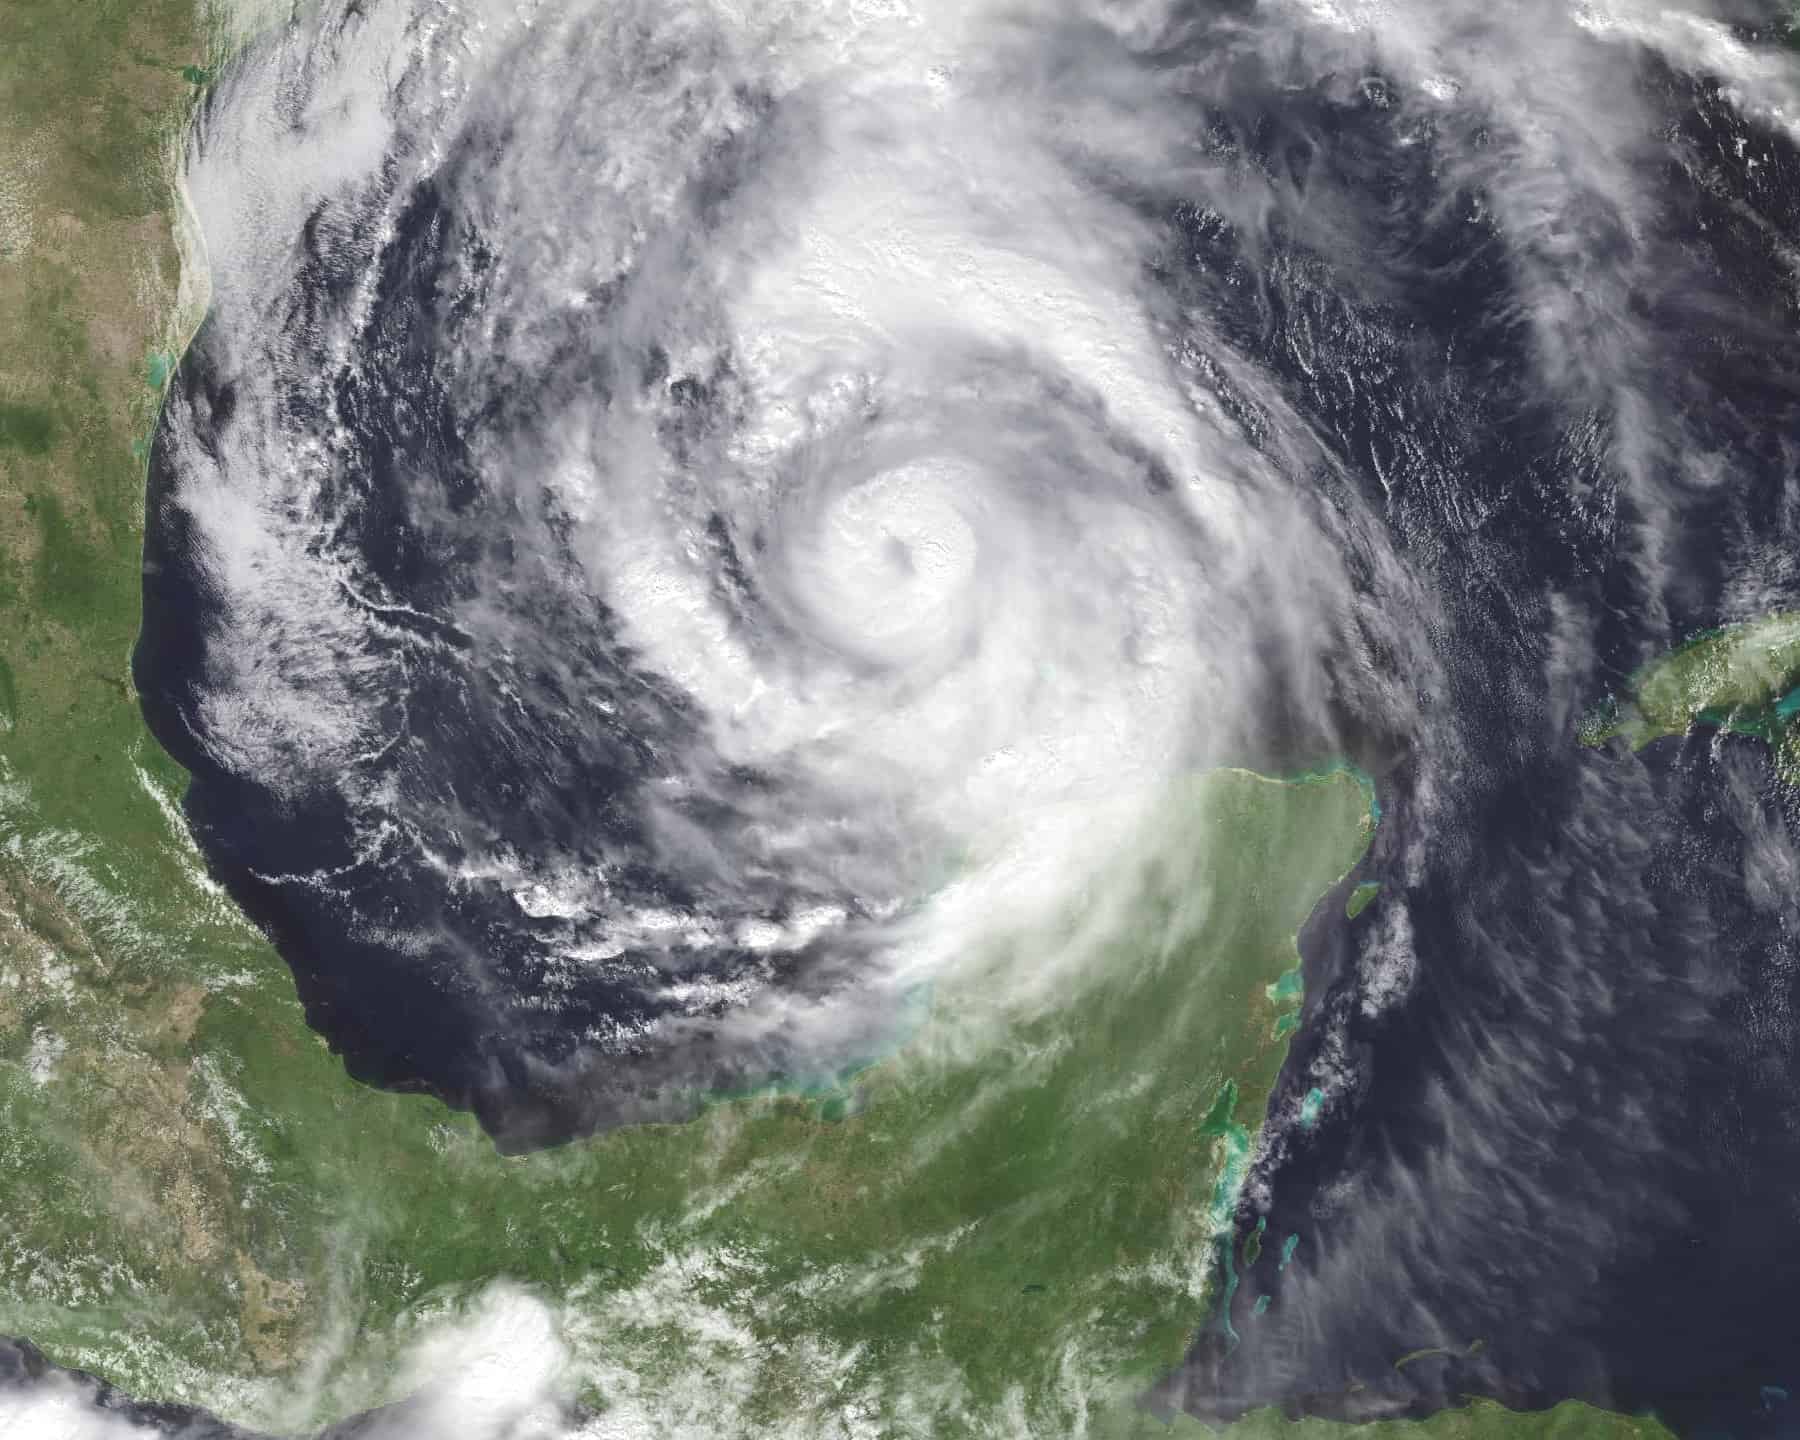 Hurricane Opal rapidly intensifying in the Gulf of Mexico on October 3, 1995